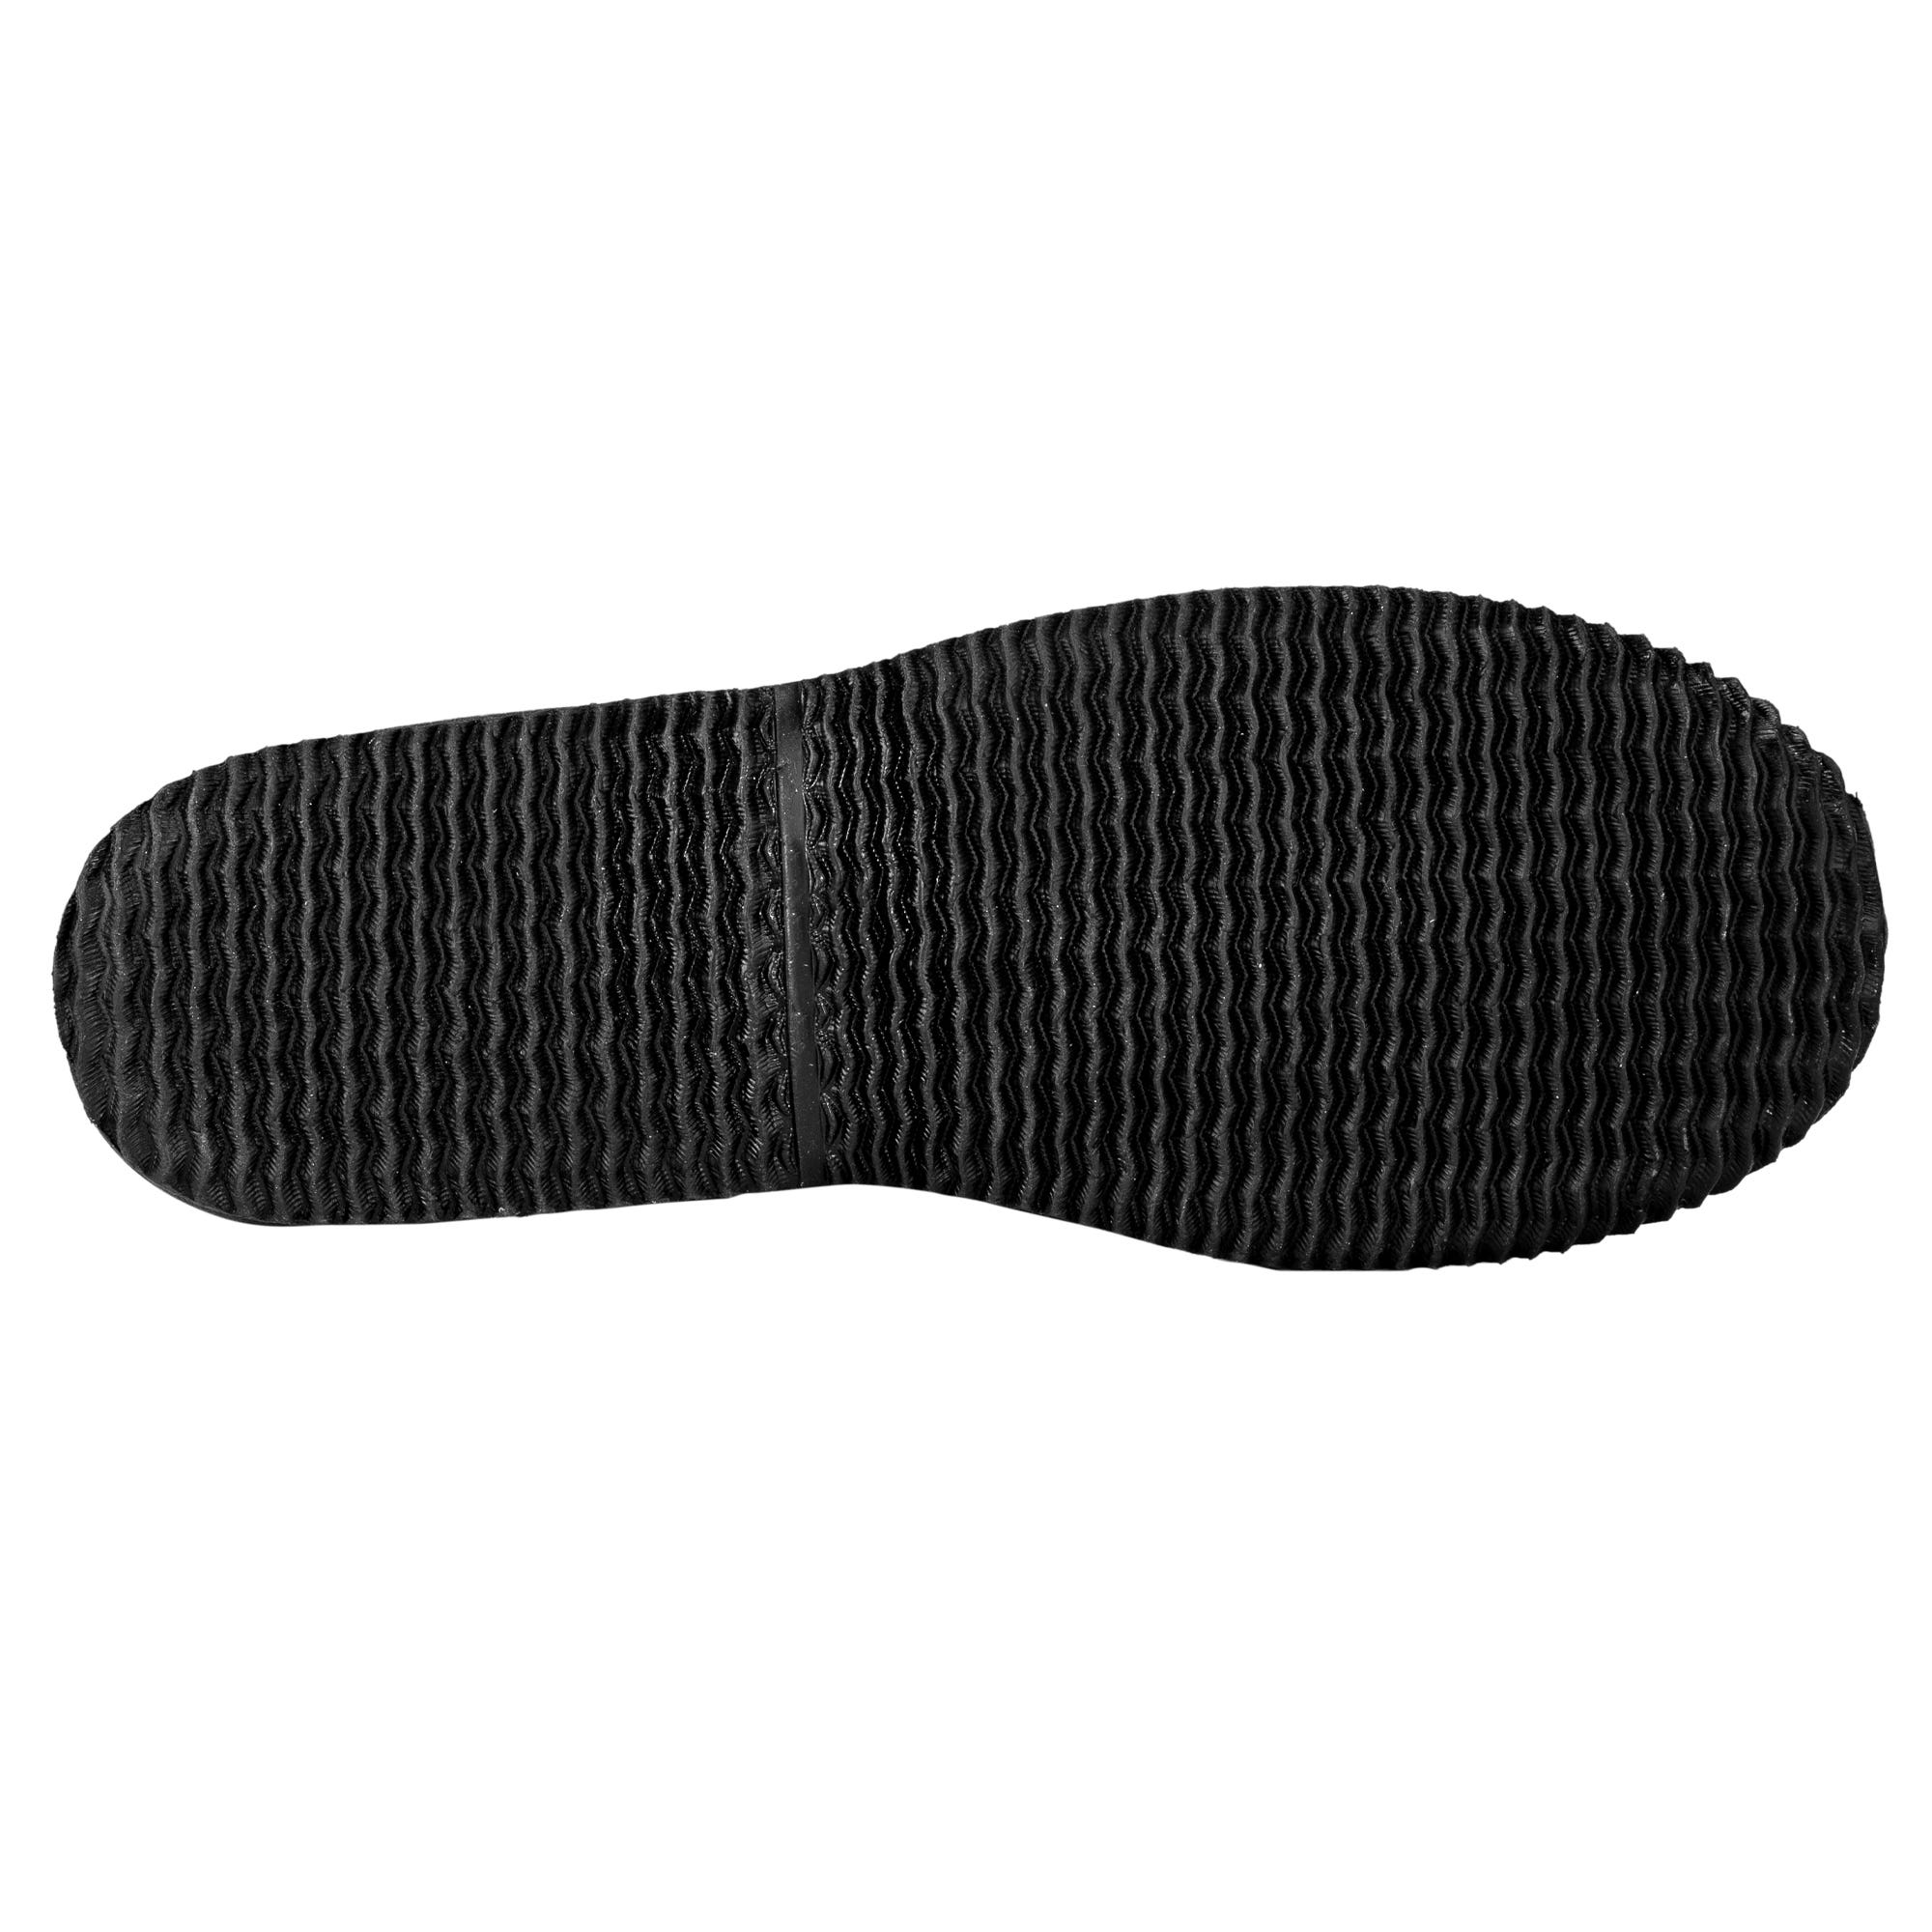 SHOE COVER HIGH ADULT / KID - Sparco Shop